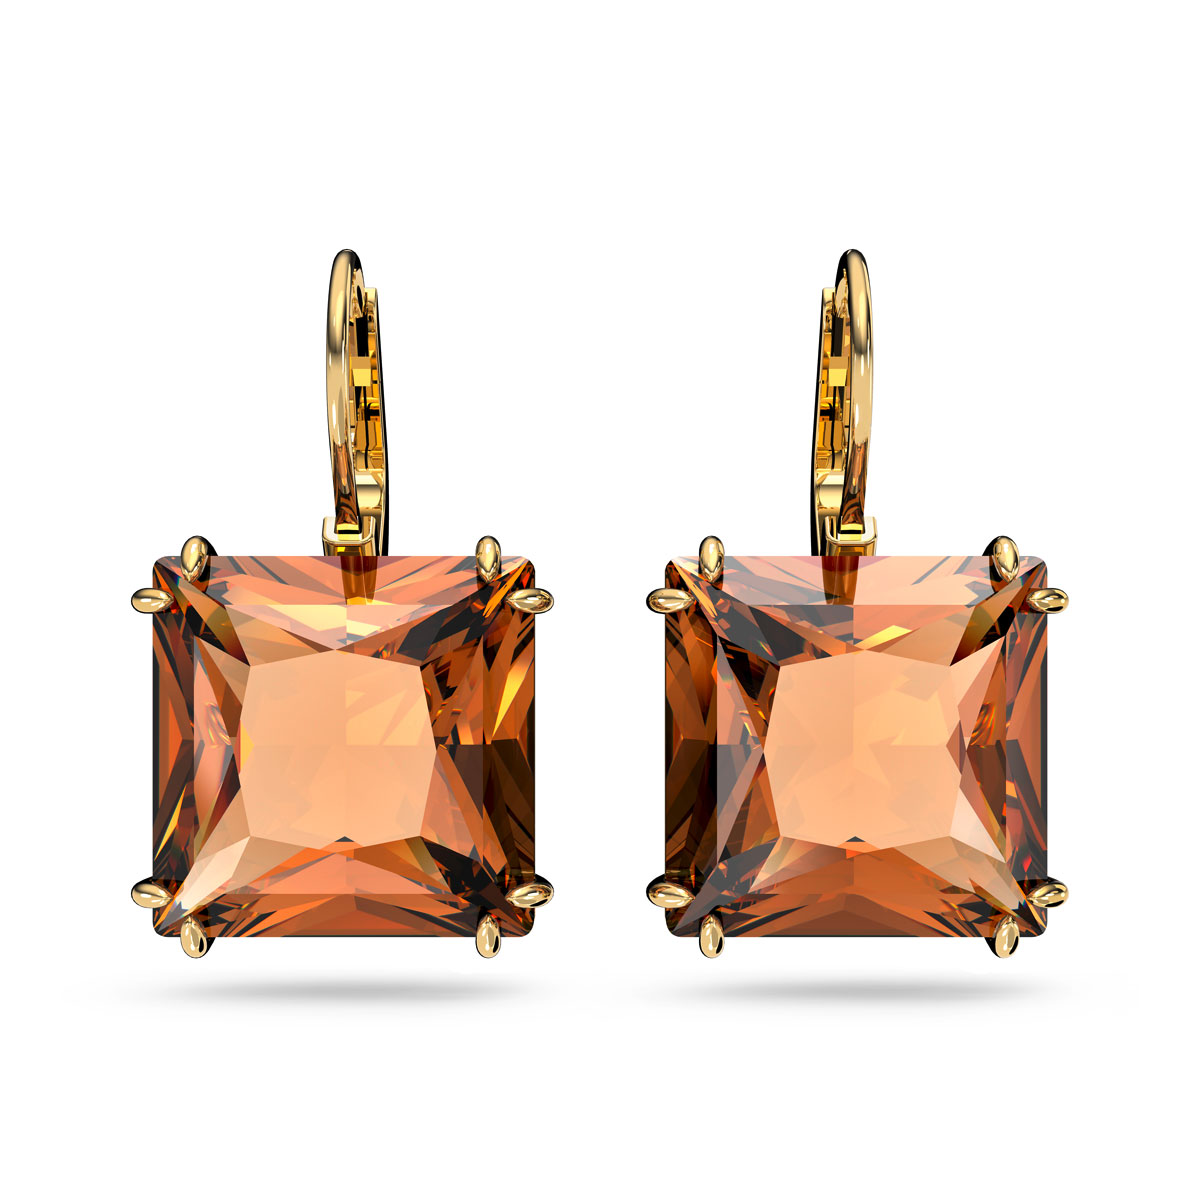 Swarovski Millenia Earrings, Square Cut Crystal, Brown, Gold-Tone Plated